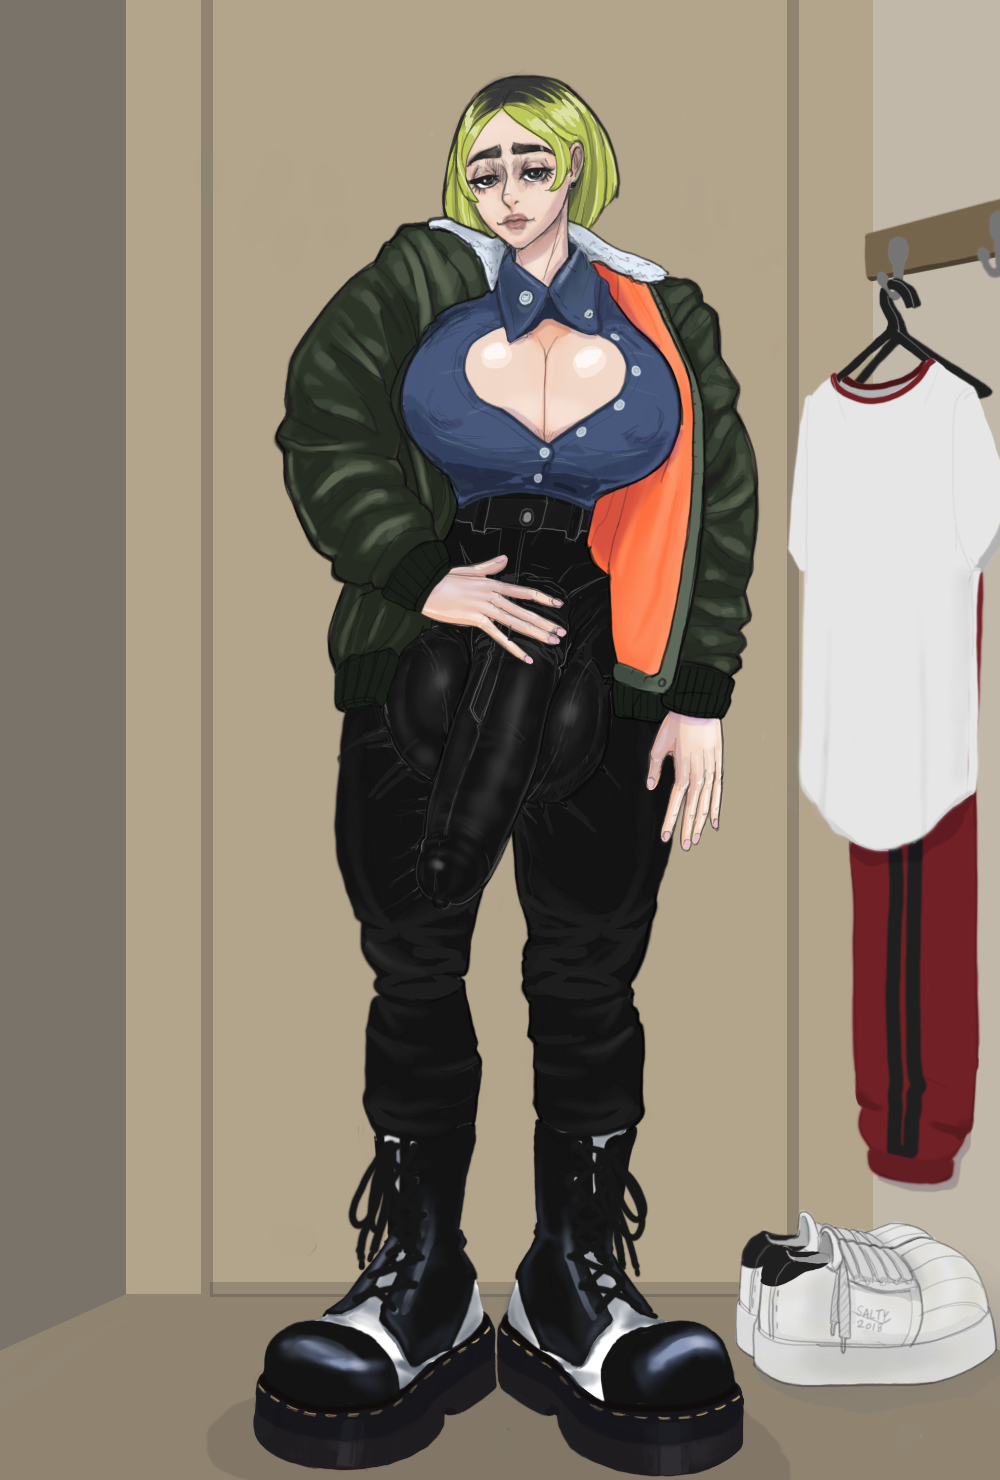 saltysopresa-blog: Casual Ofidia  Ofidia out of her exosuit. Trying on some clothes